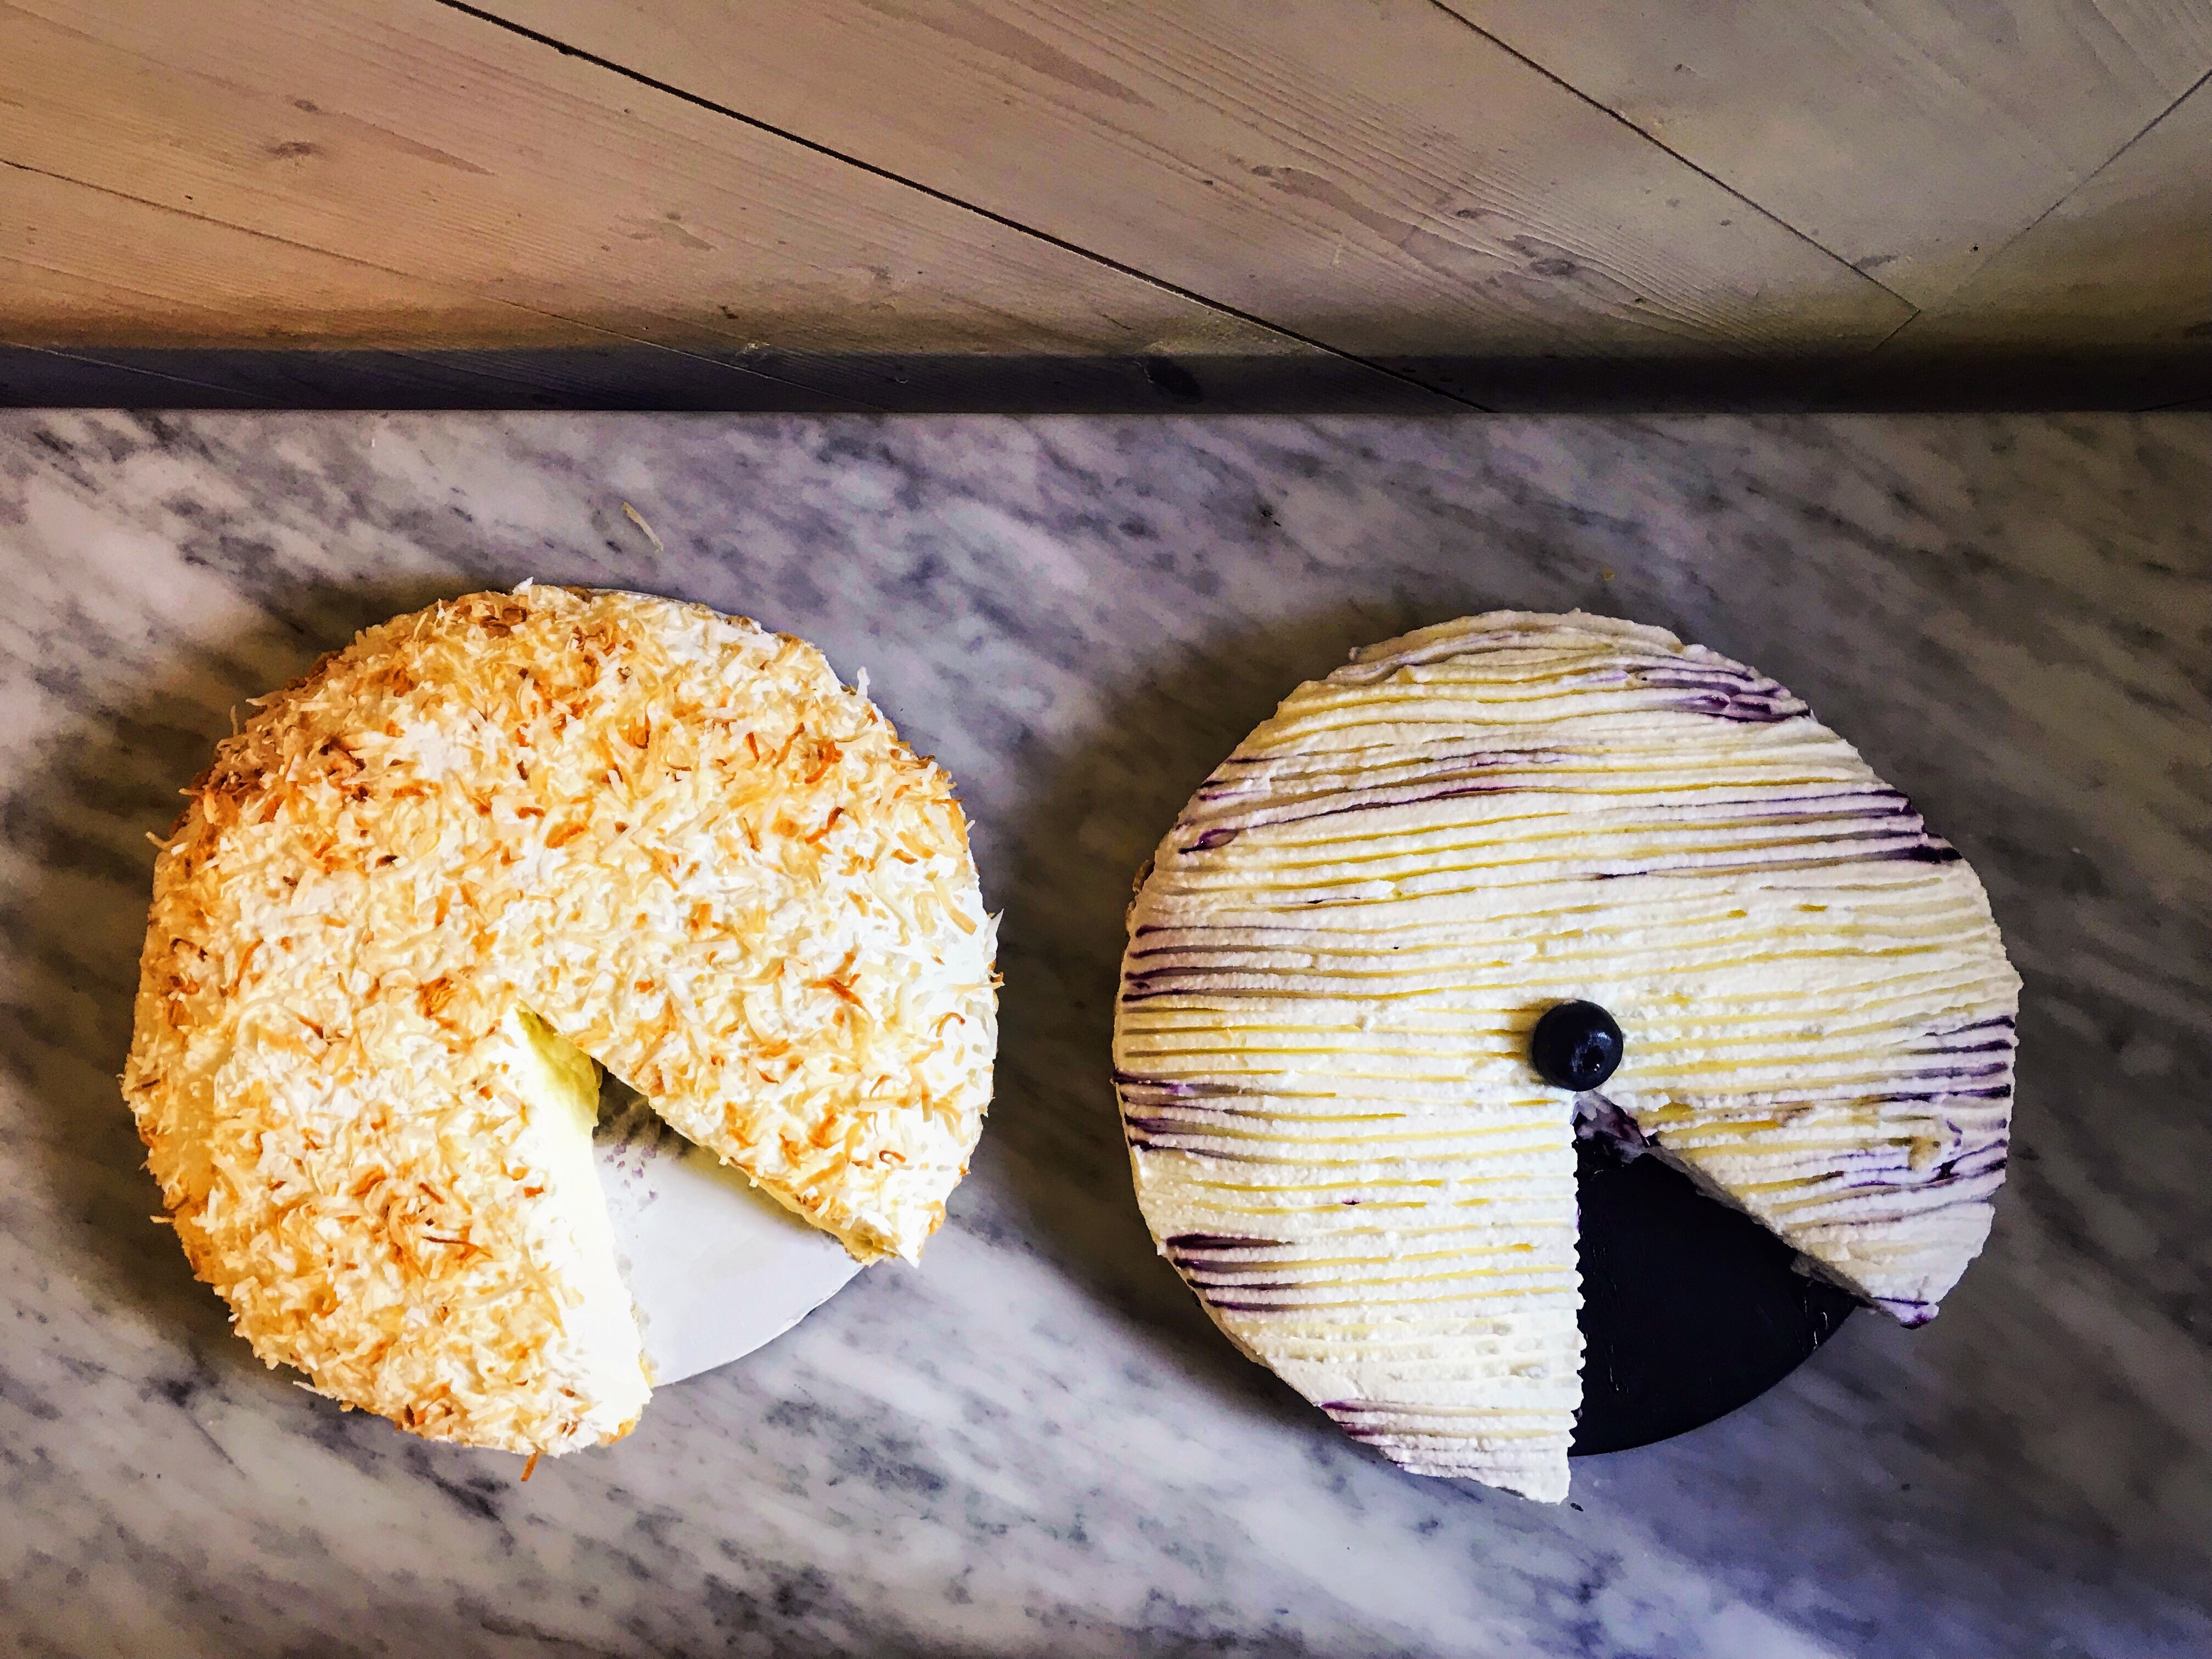 The coconut cream and Royal Blue pies from Baked and Boozy